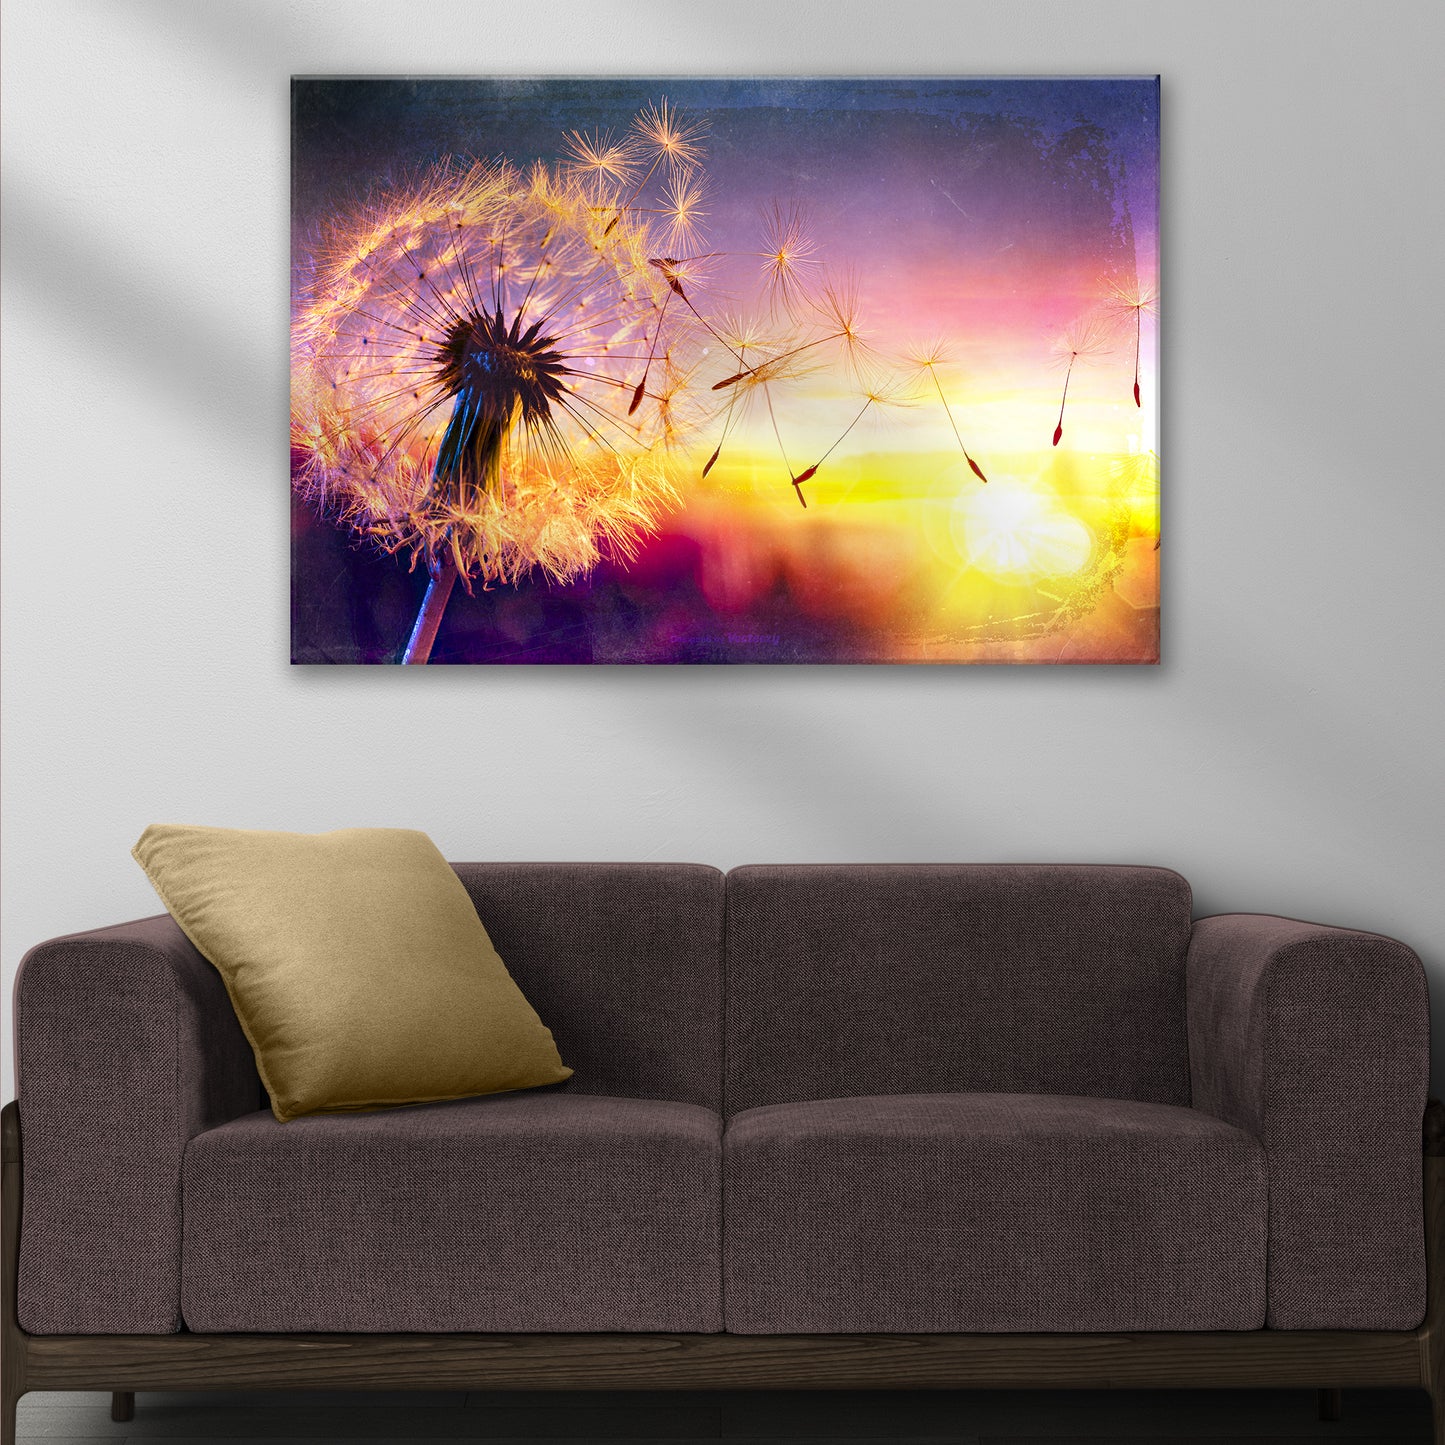 Dandelion At Sunset Canvas Wall Art Style 2 - Image by Tailored Canvases